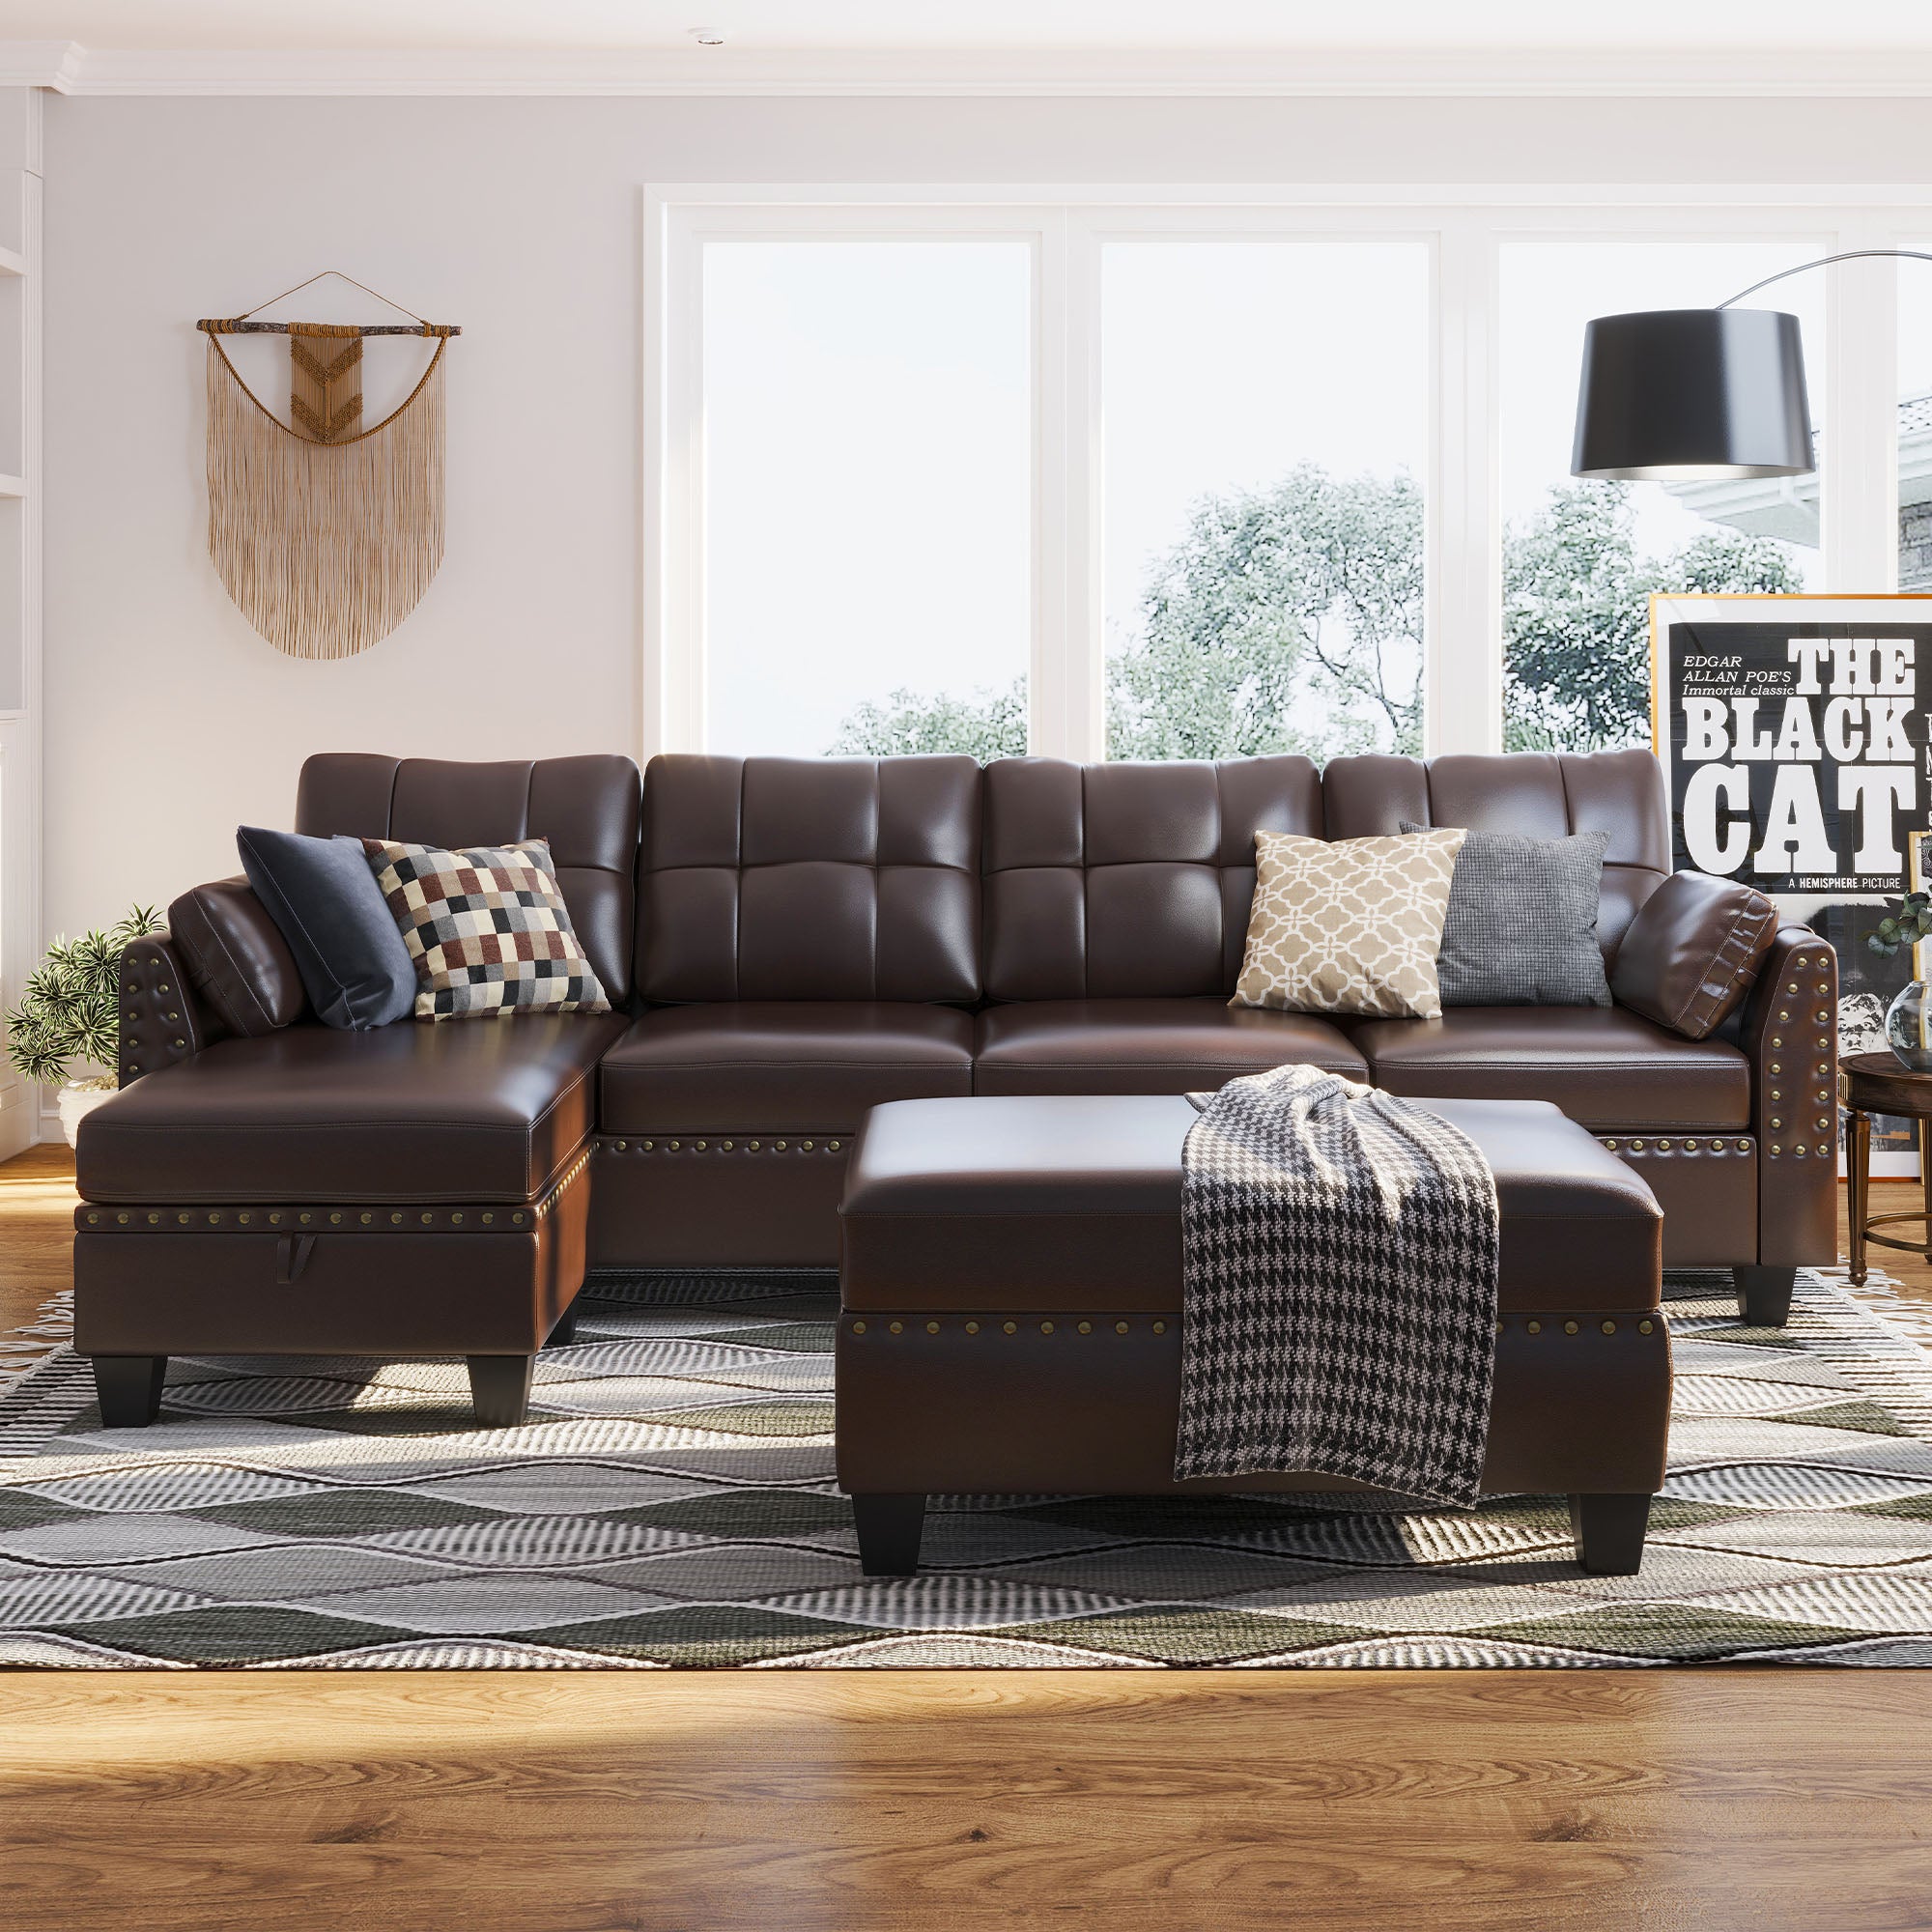 HONBAY Brown Faux Leather 4-Seater L Shape Sectional Sofa 